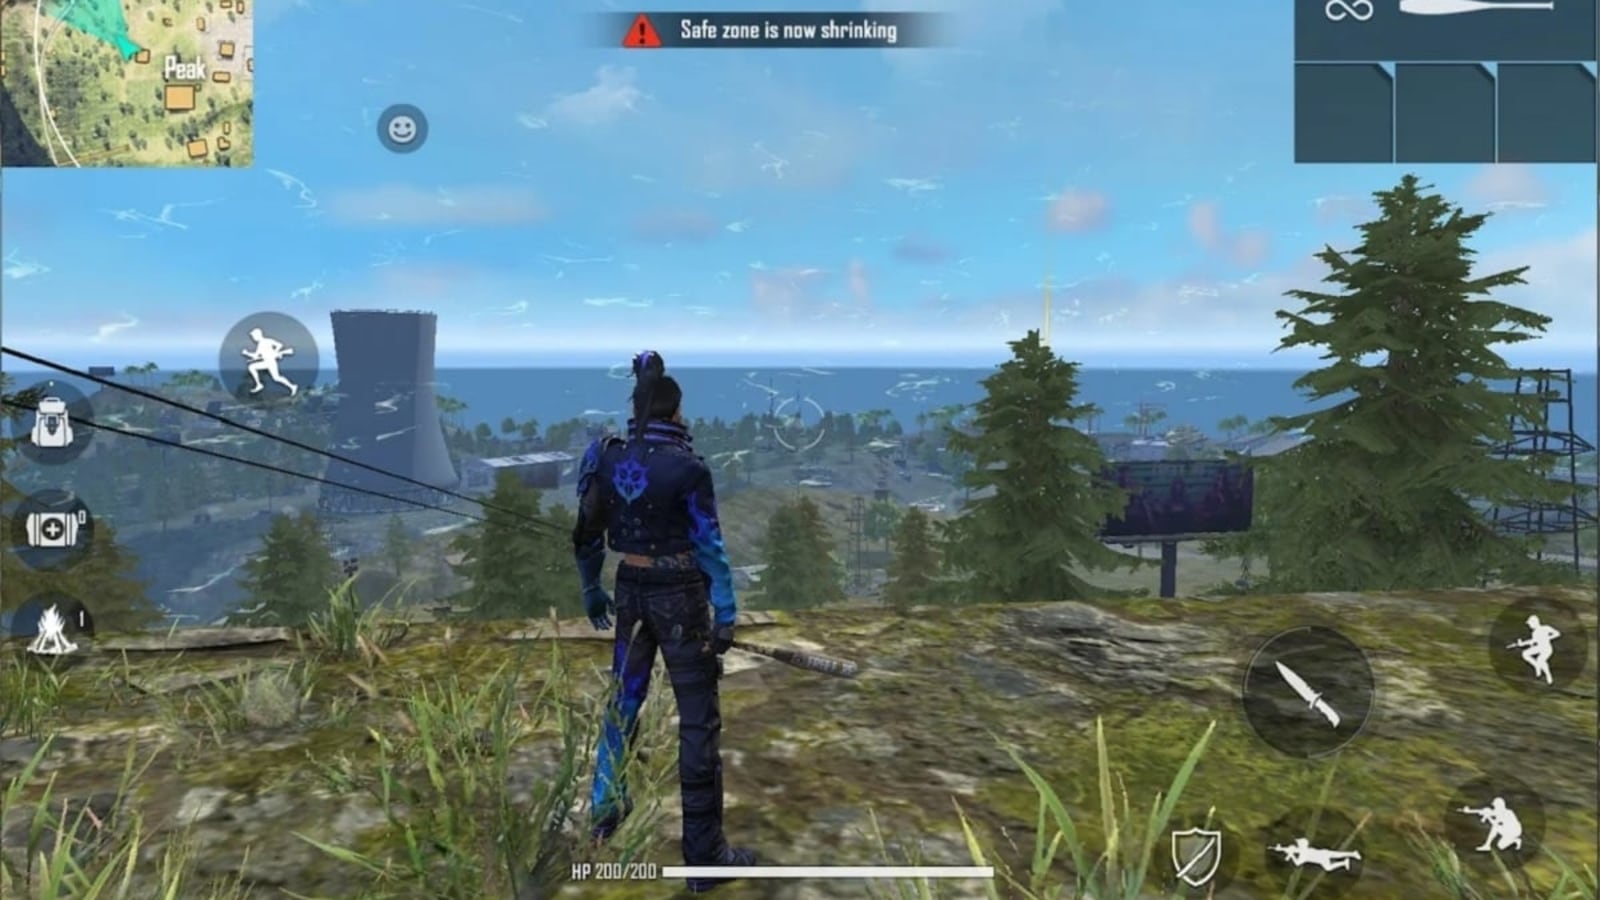 Best Android Battle Royale Games to Play on PC (FREE) 2021